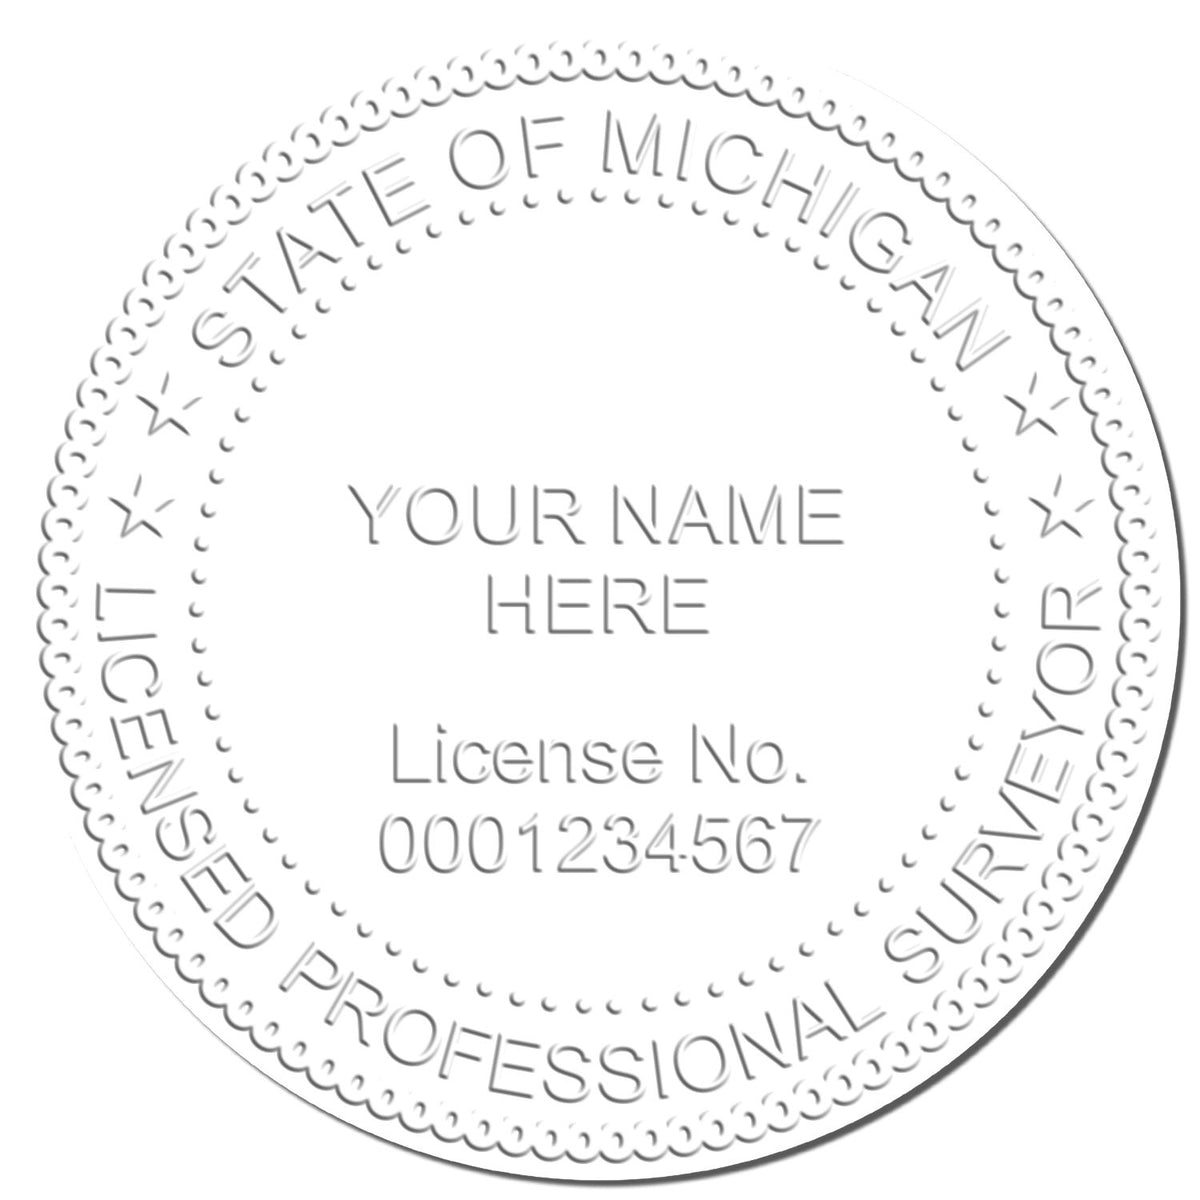 This paper is stamped with a sample imprint of the Gift Michigan Land Surveyor Seal, signifying its quality and reliability.